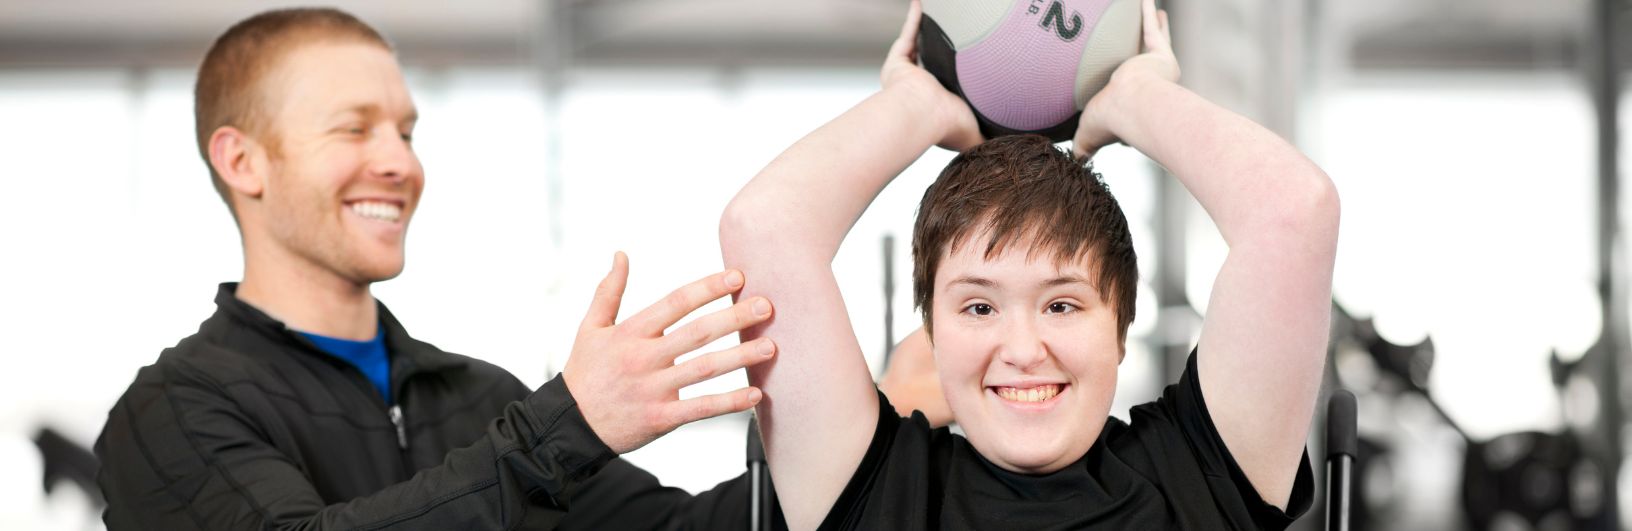 Young woman in a wheelchair holding a small ball over her head with a personal trainer at her side